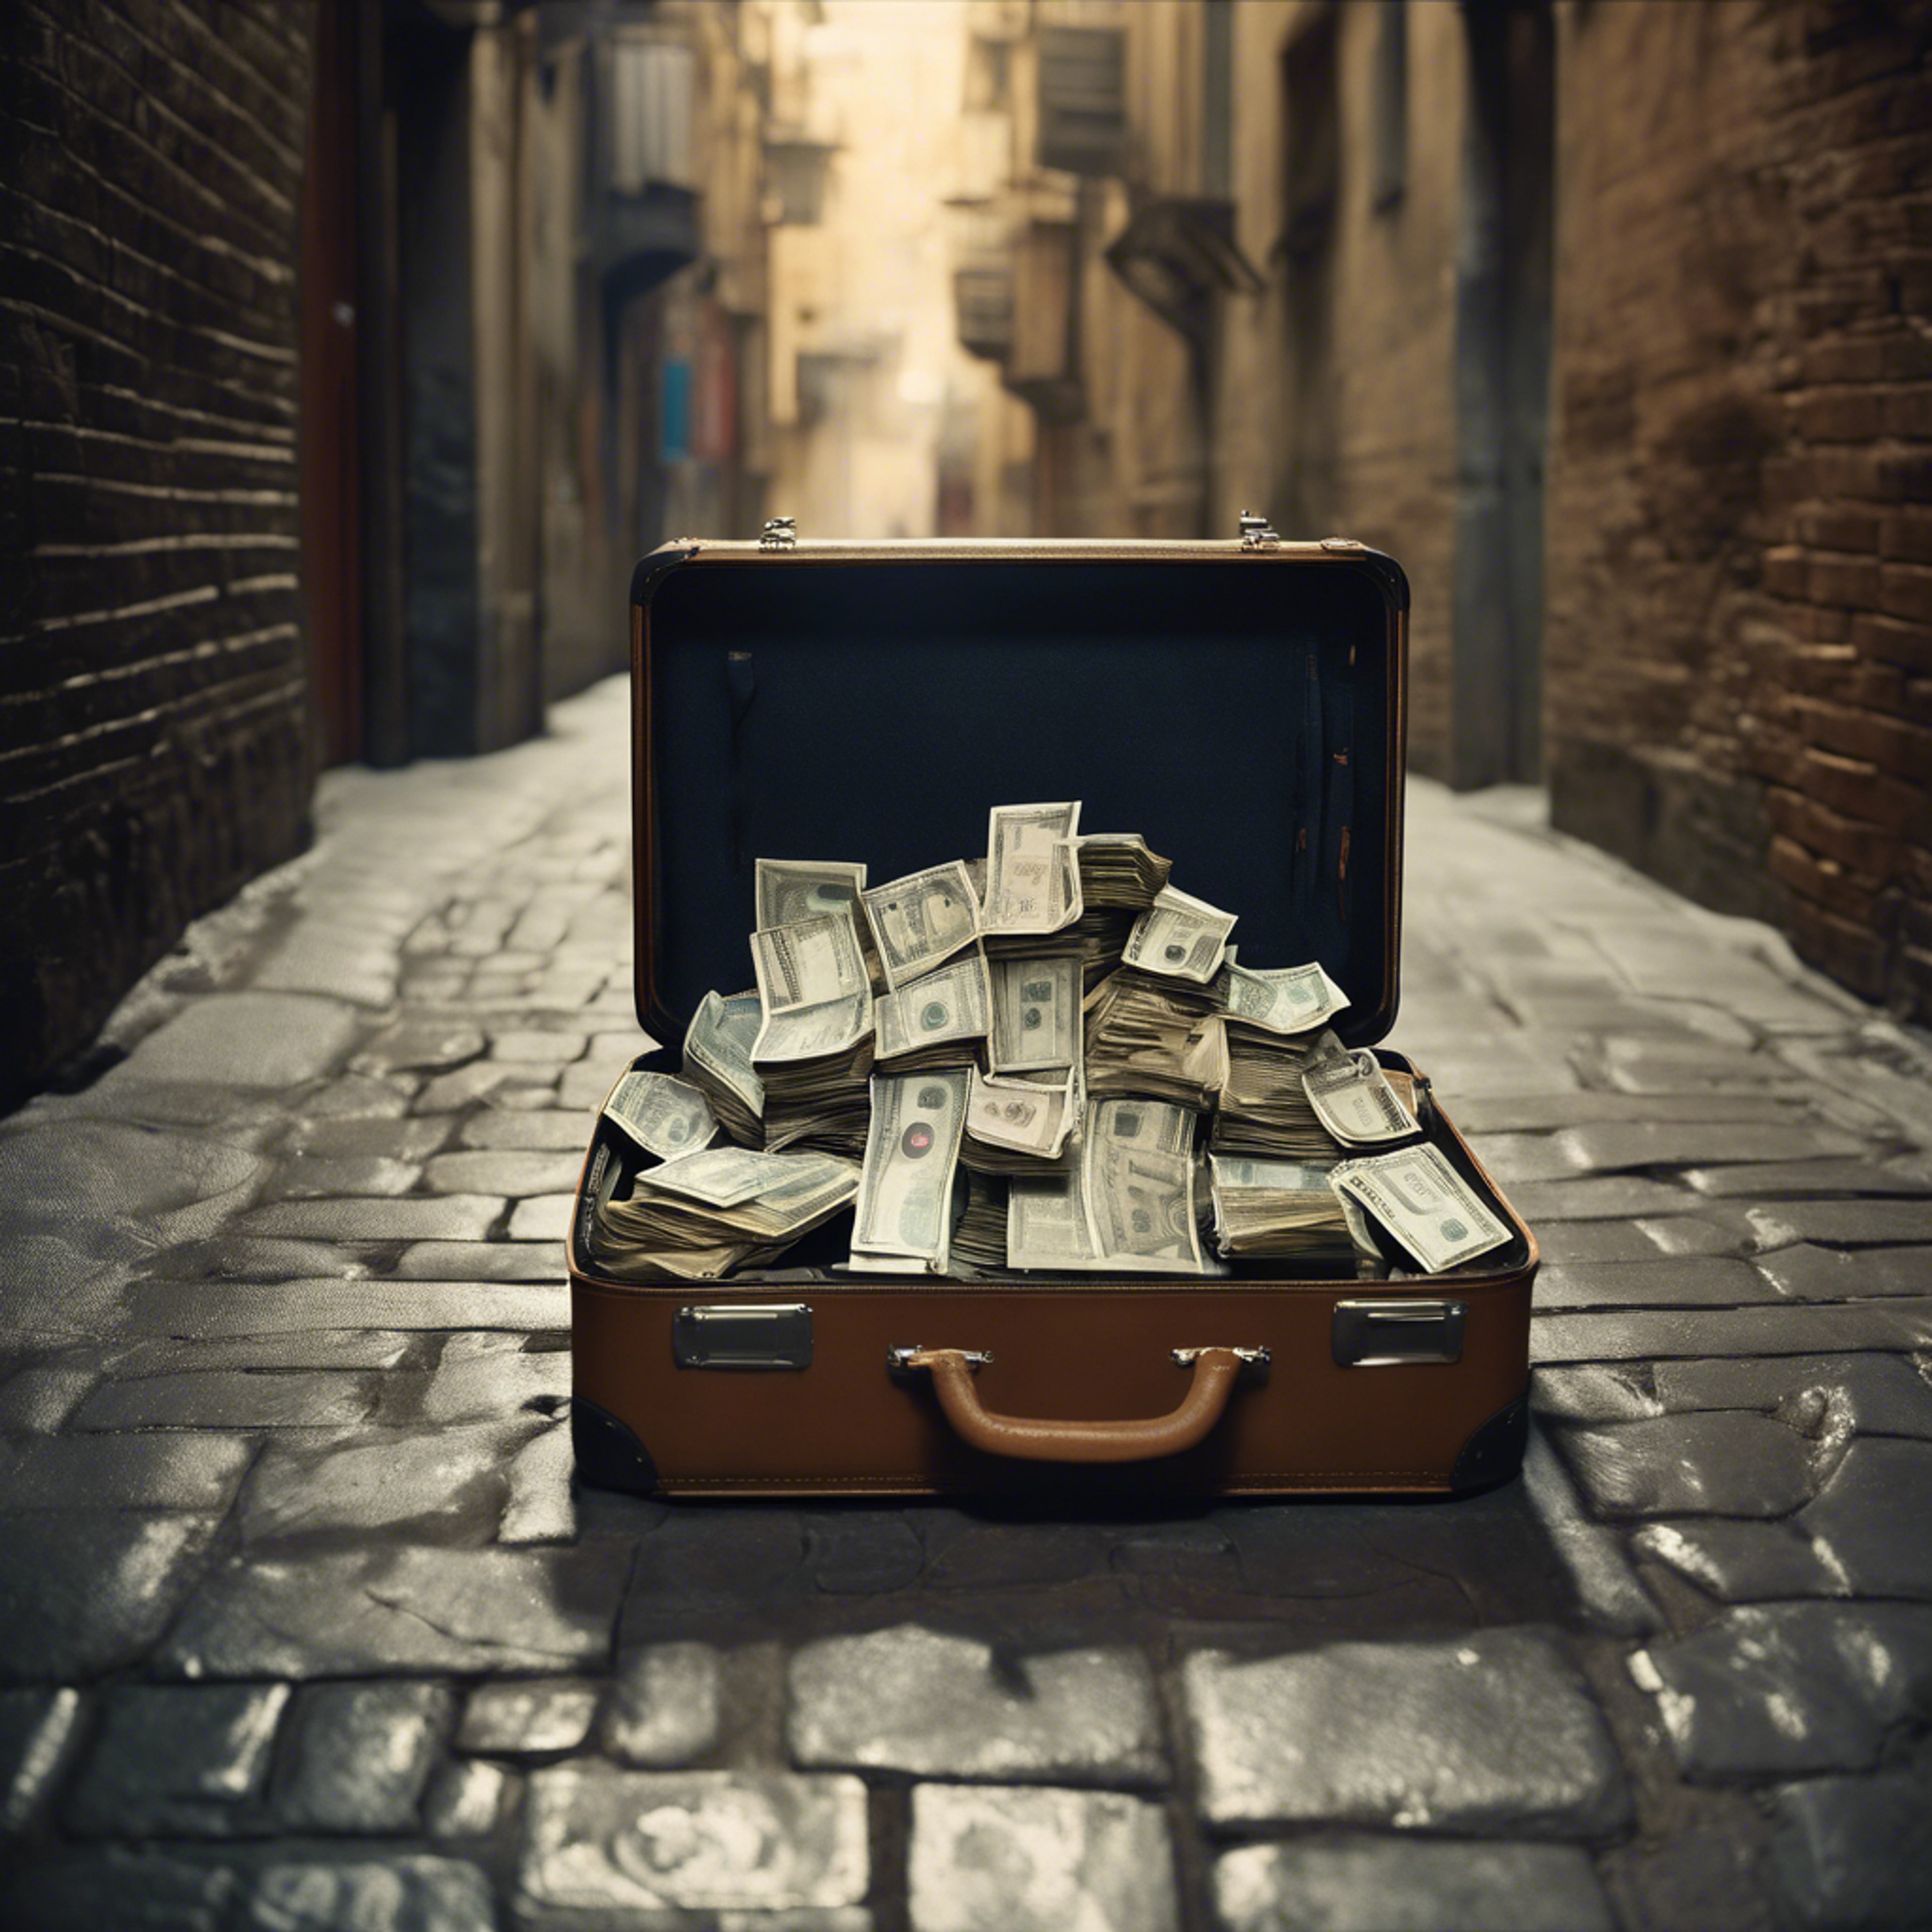 A suitcase filled with mafia money being exchanged in dimly lit alleyway. Behang[001aead7b2c840f5bbce]